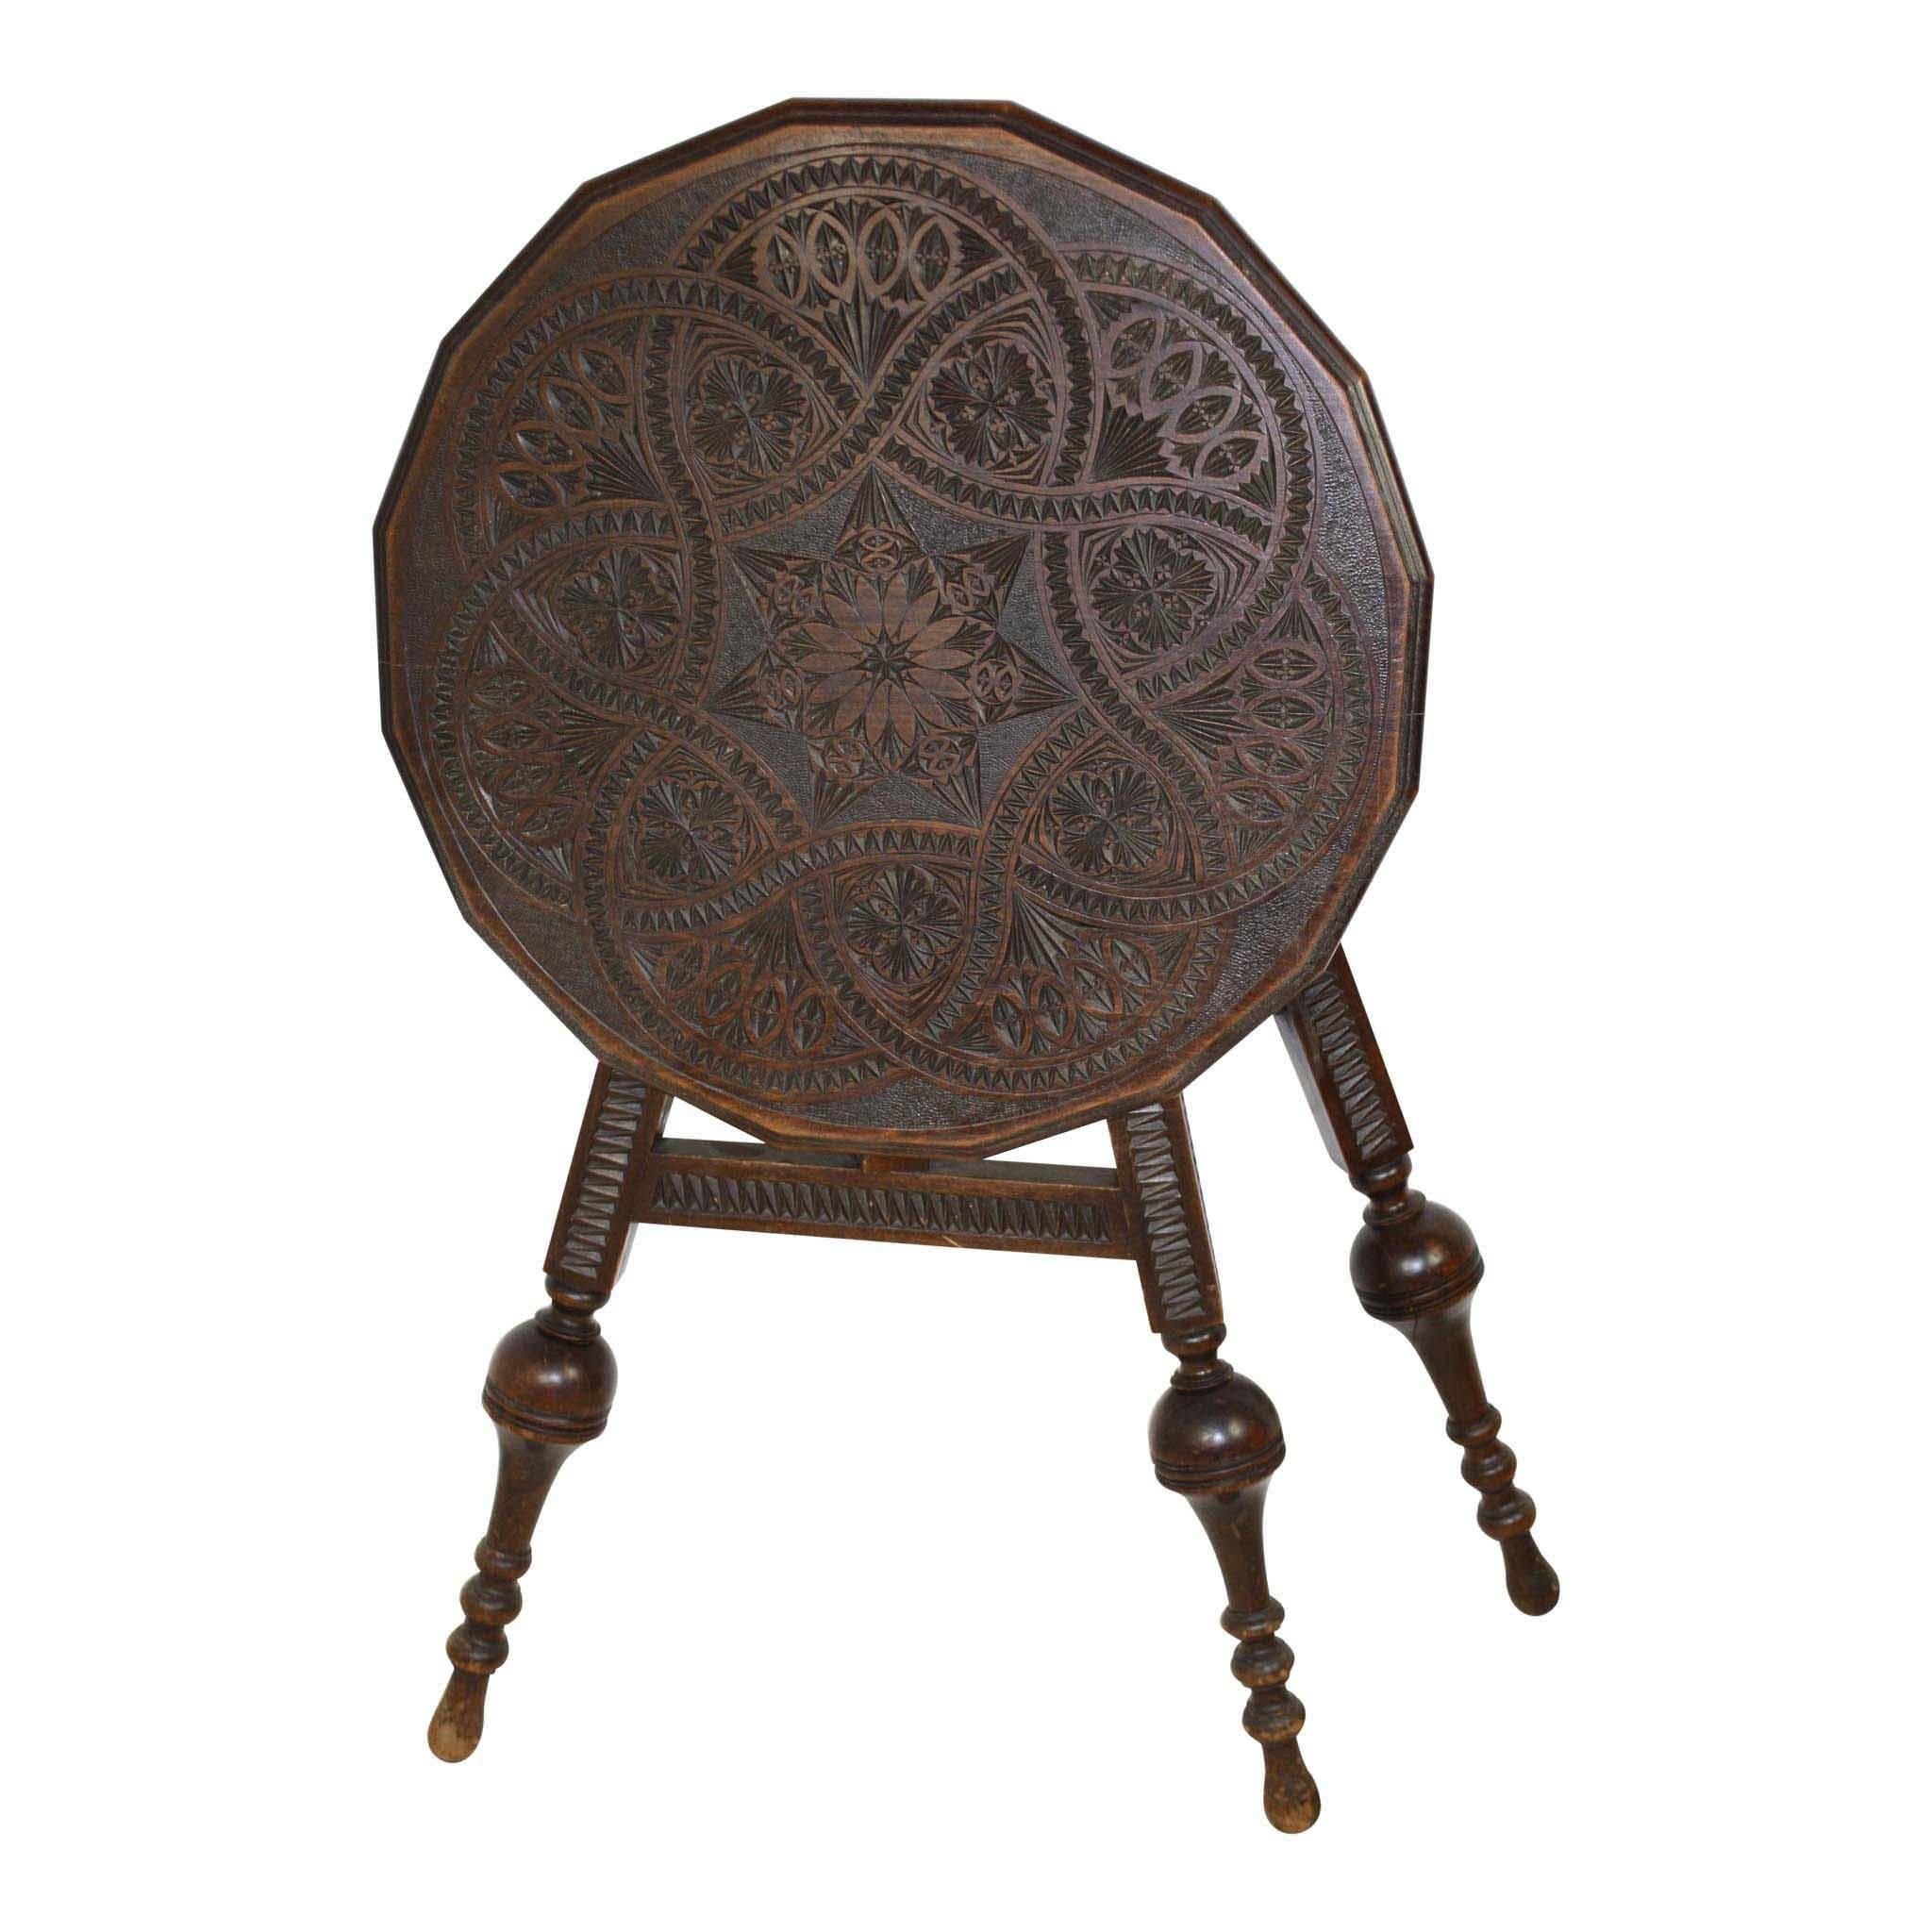 The beauty of this table is found in its symmetrical shape and carving. The top bears a circle which is carved with a continuous rope design forming two heptagons. Precise carving between every section within the circle is extraordinary. The legs